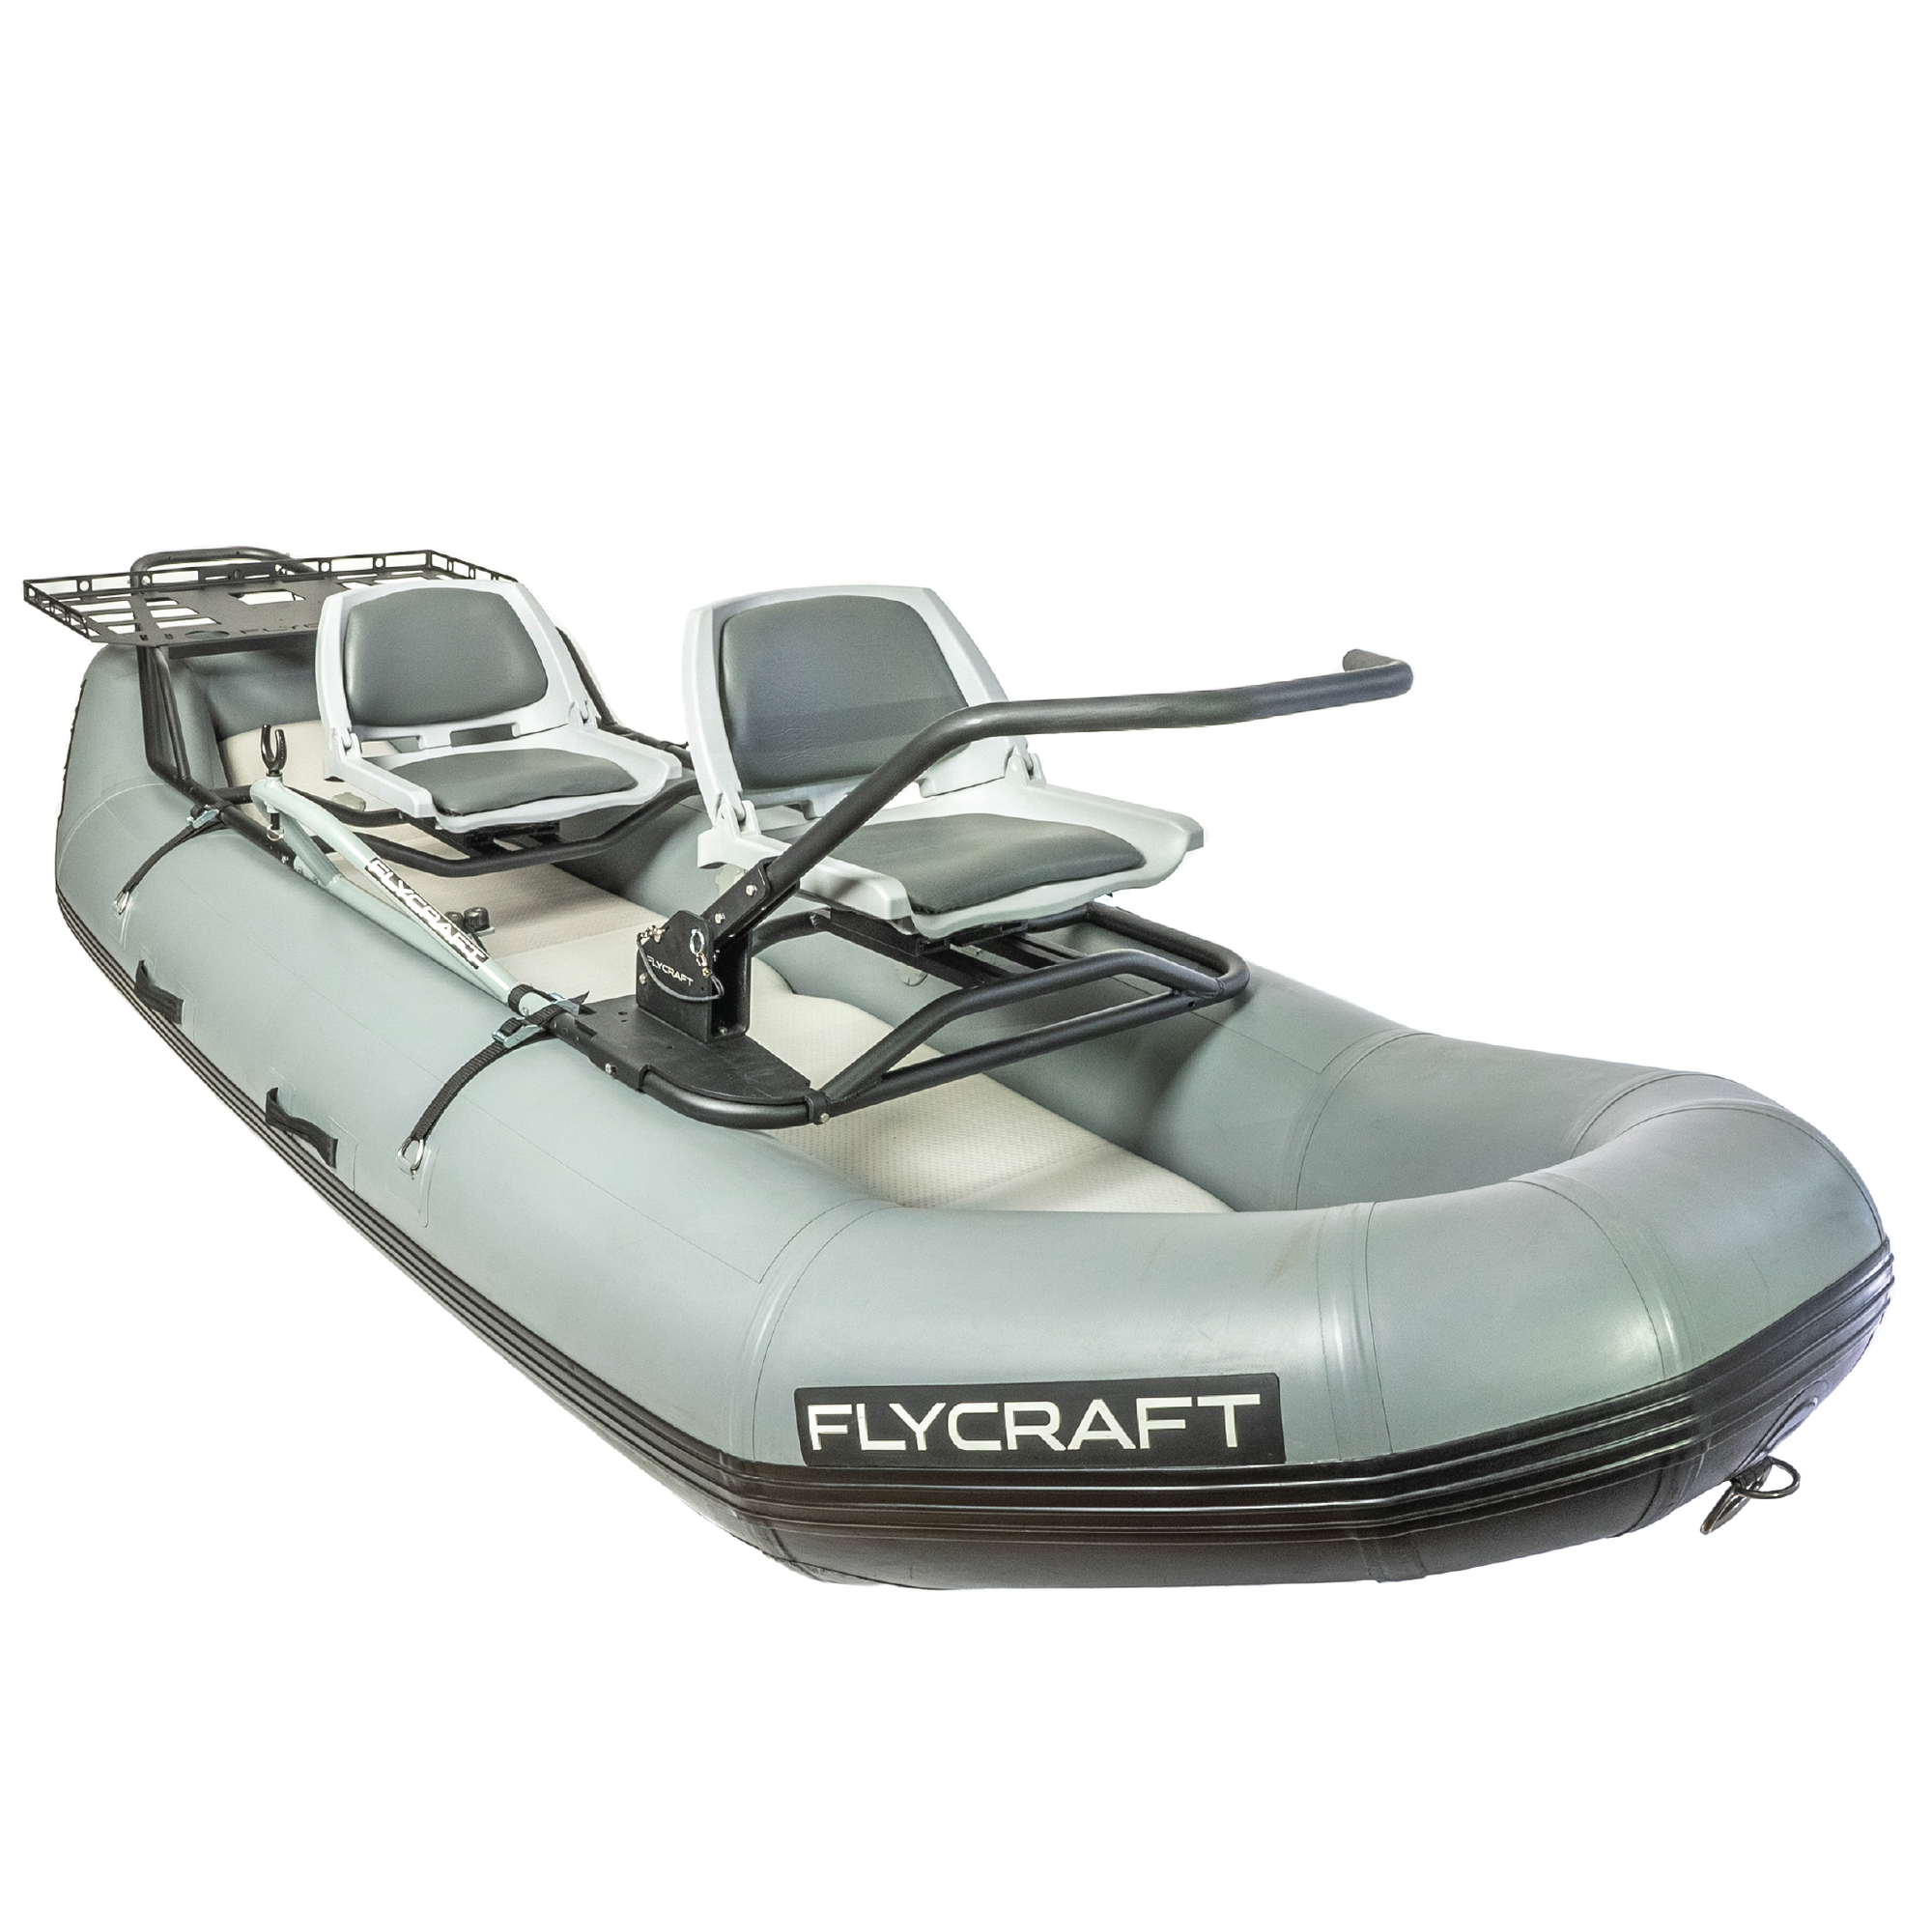 360 Degrees High Quality Kayak Fixer Support Inflatable Boat